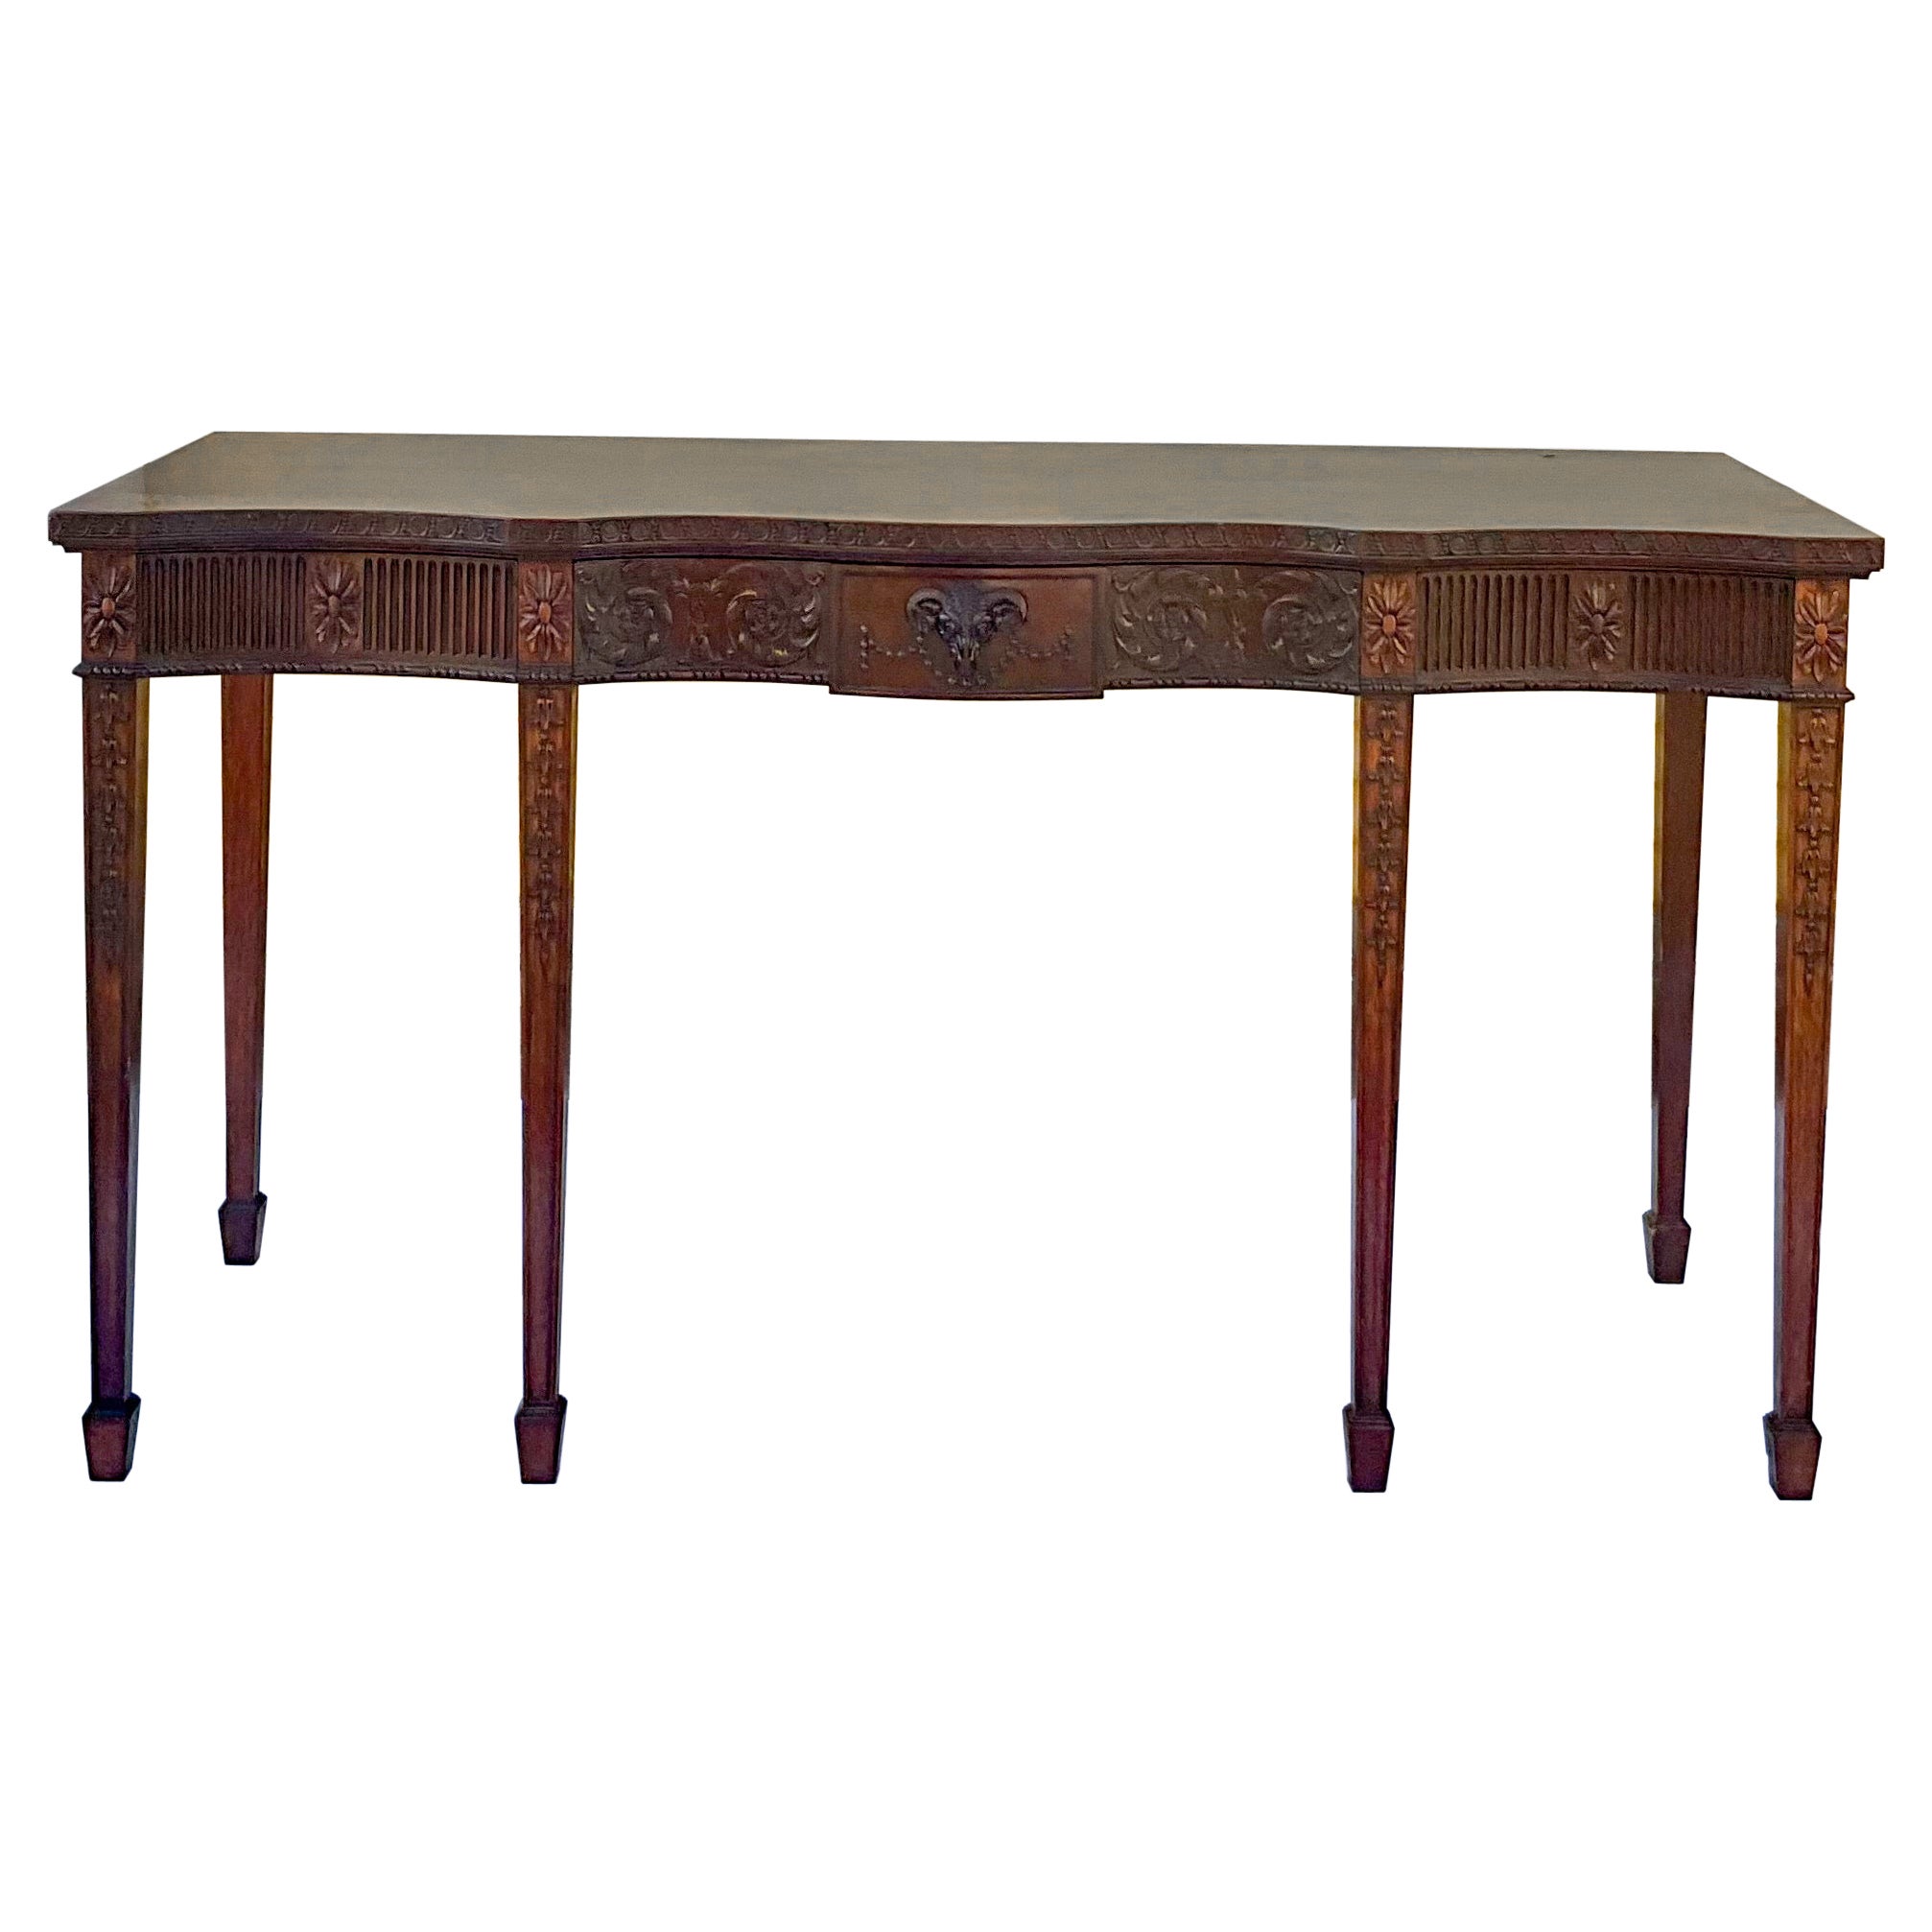 1940s Neoclassical Style Carved Mahogany Huntboard / Console Table / Server